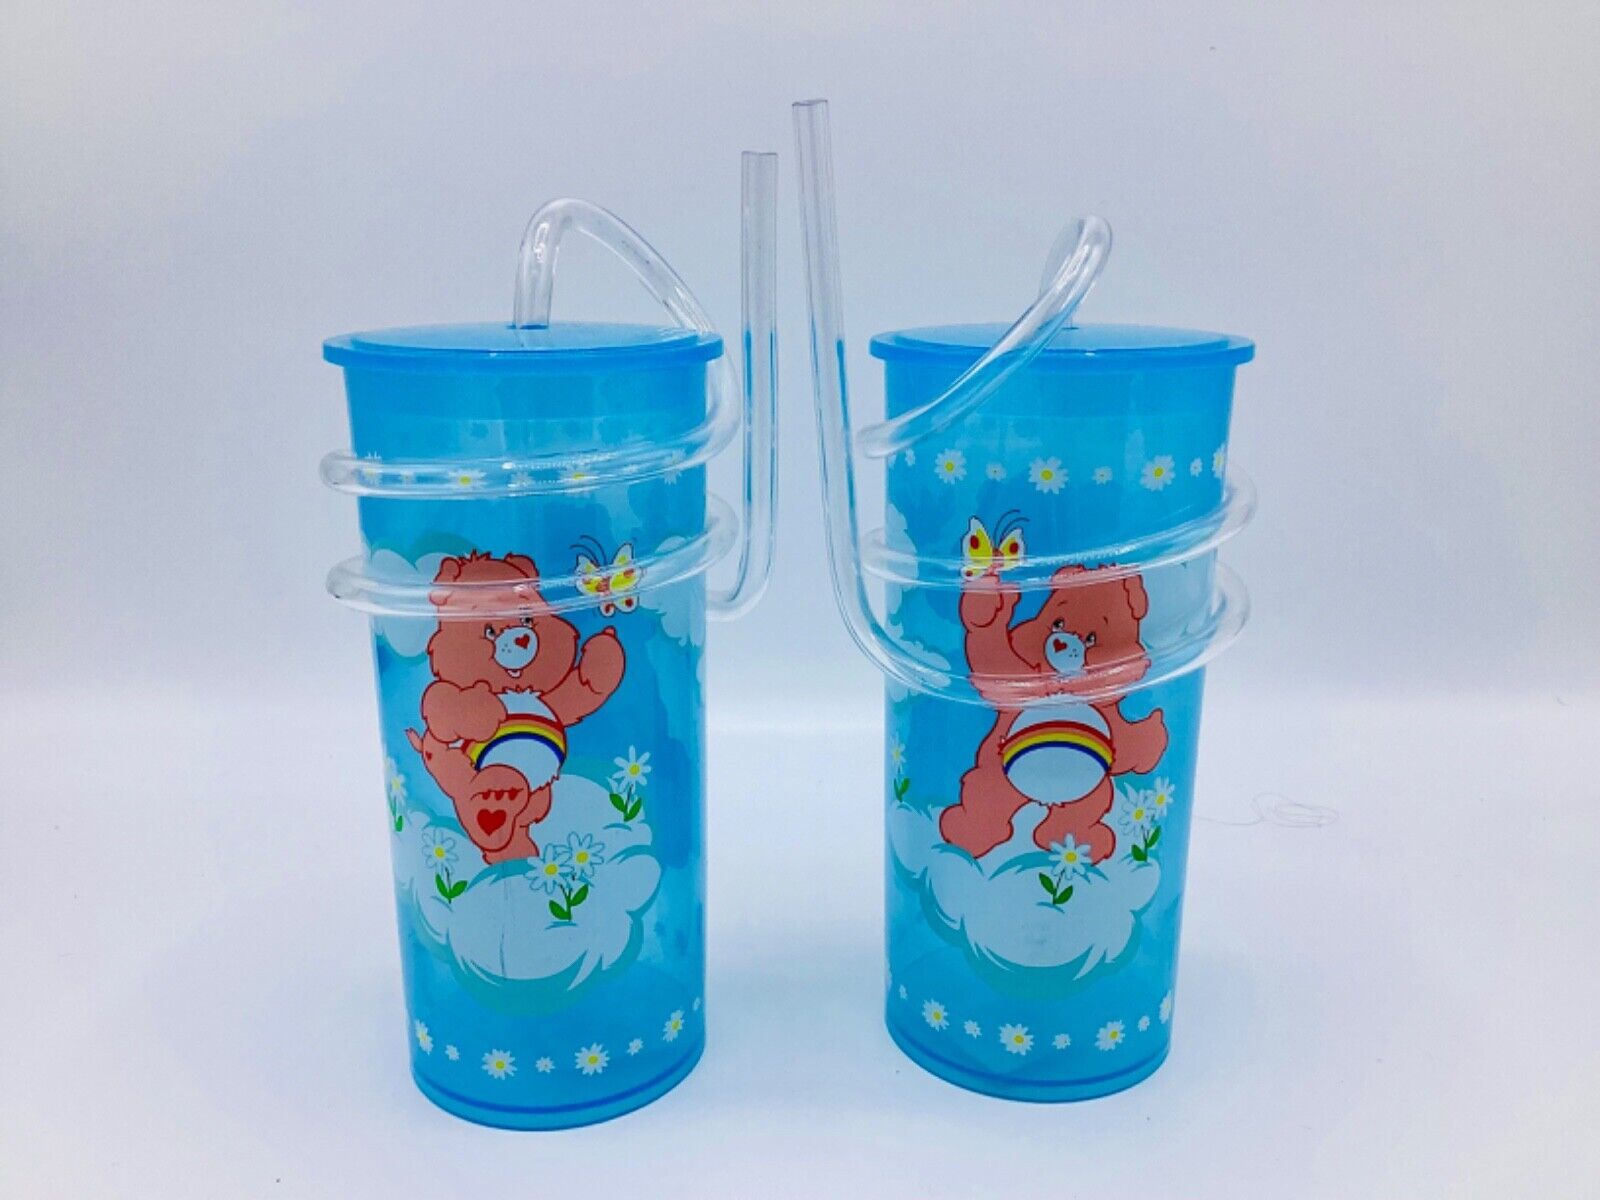 Zak Designs Care Bears Twist Straw Cup Set Of Two - $15.00